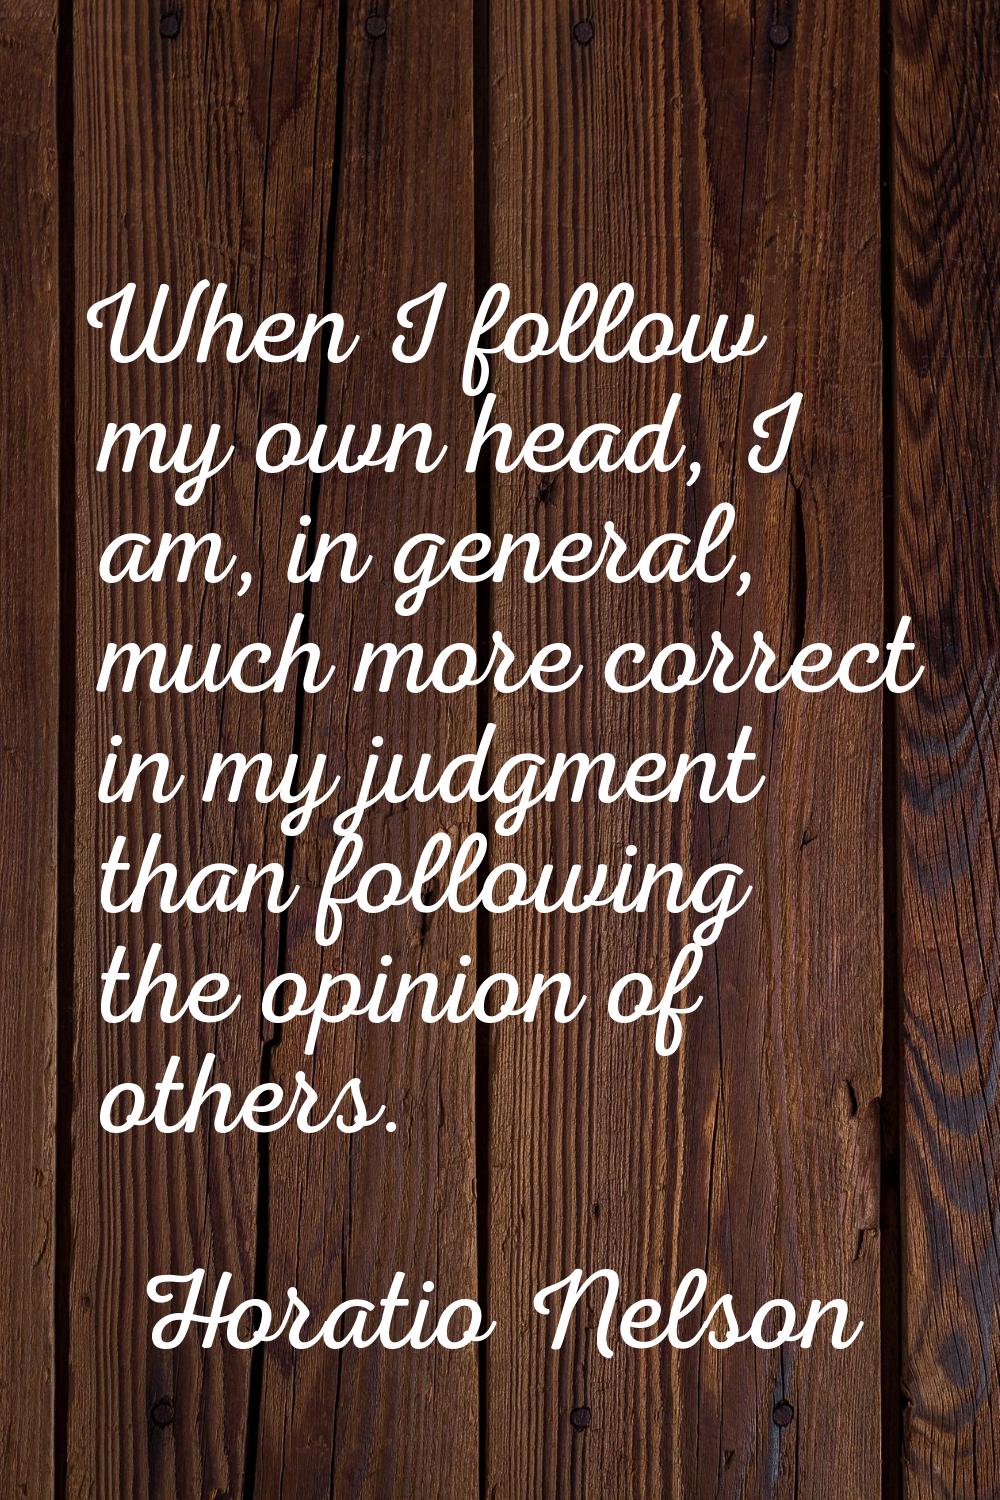 When I follow my own head, I am, in general, much more correct in my judgment than following the op